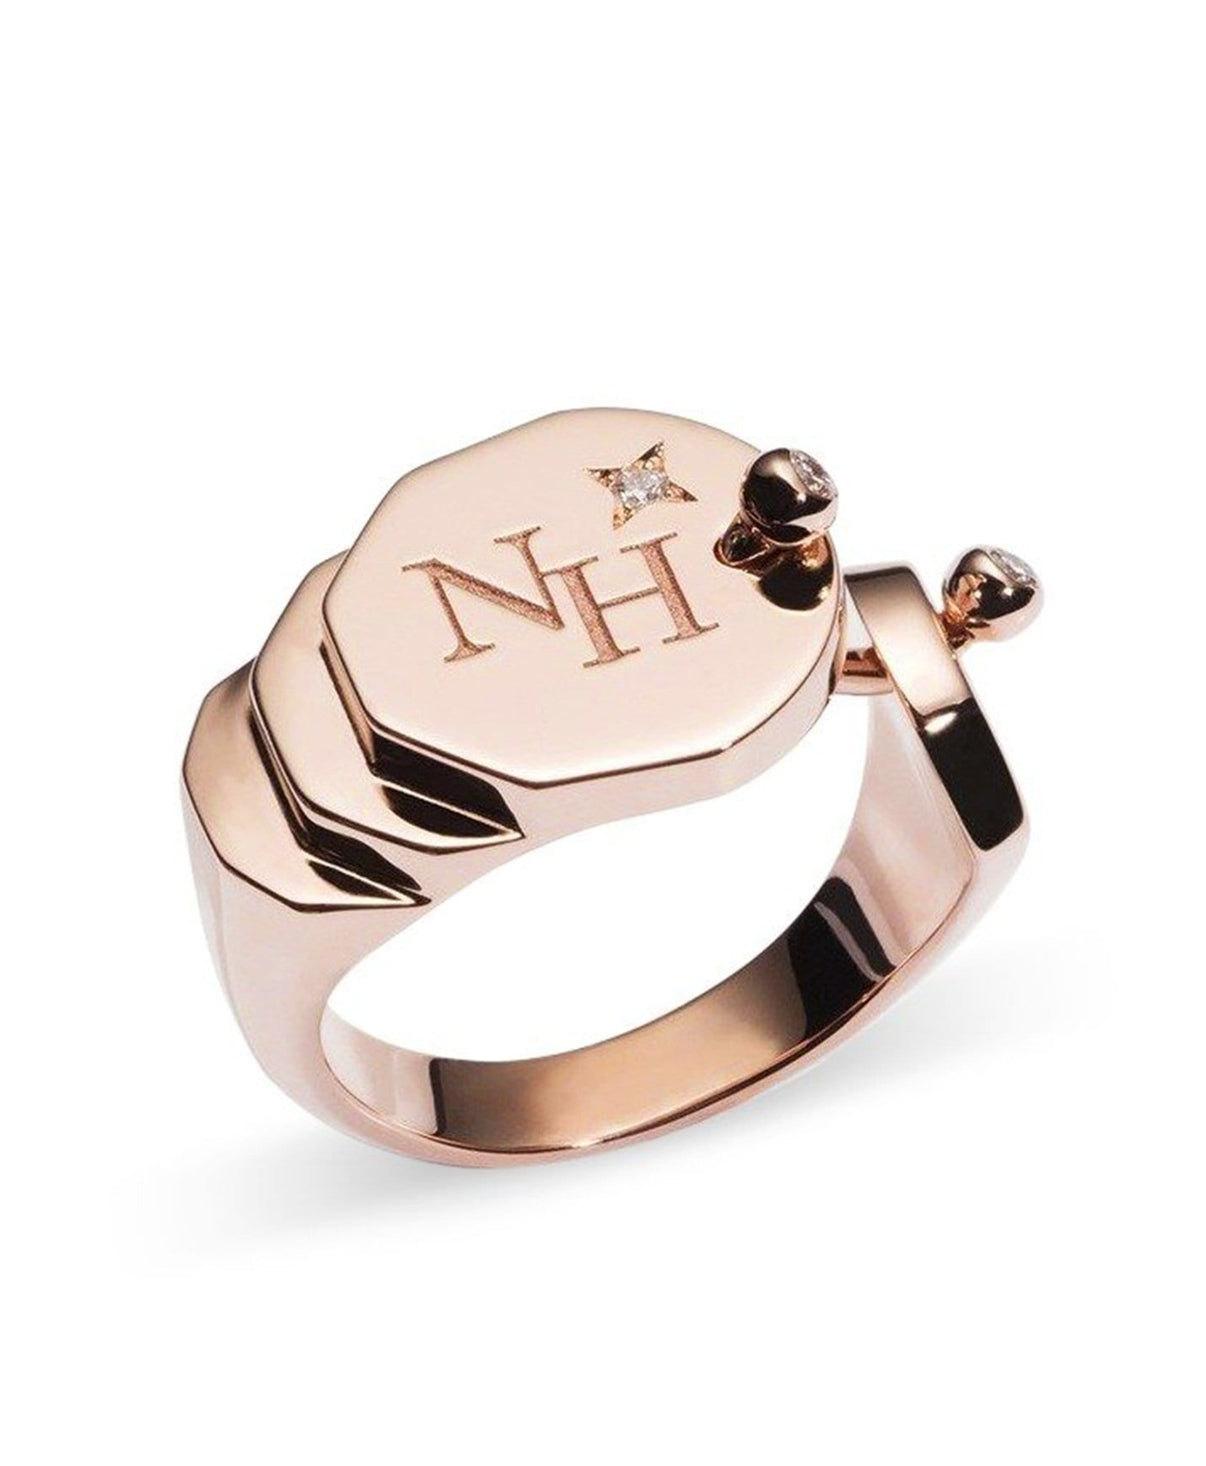 Gold Signet Ring: Discover Luxury Fine Jewelry | Nouvel Heritage || Yellow Gold